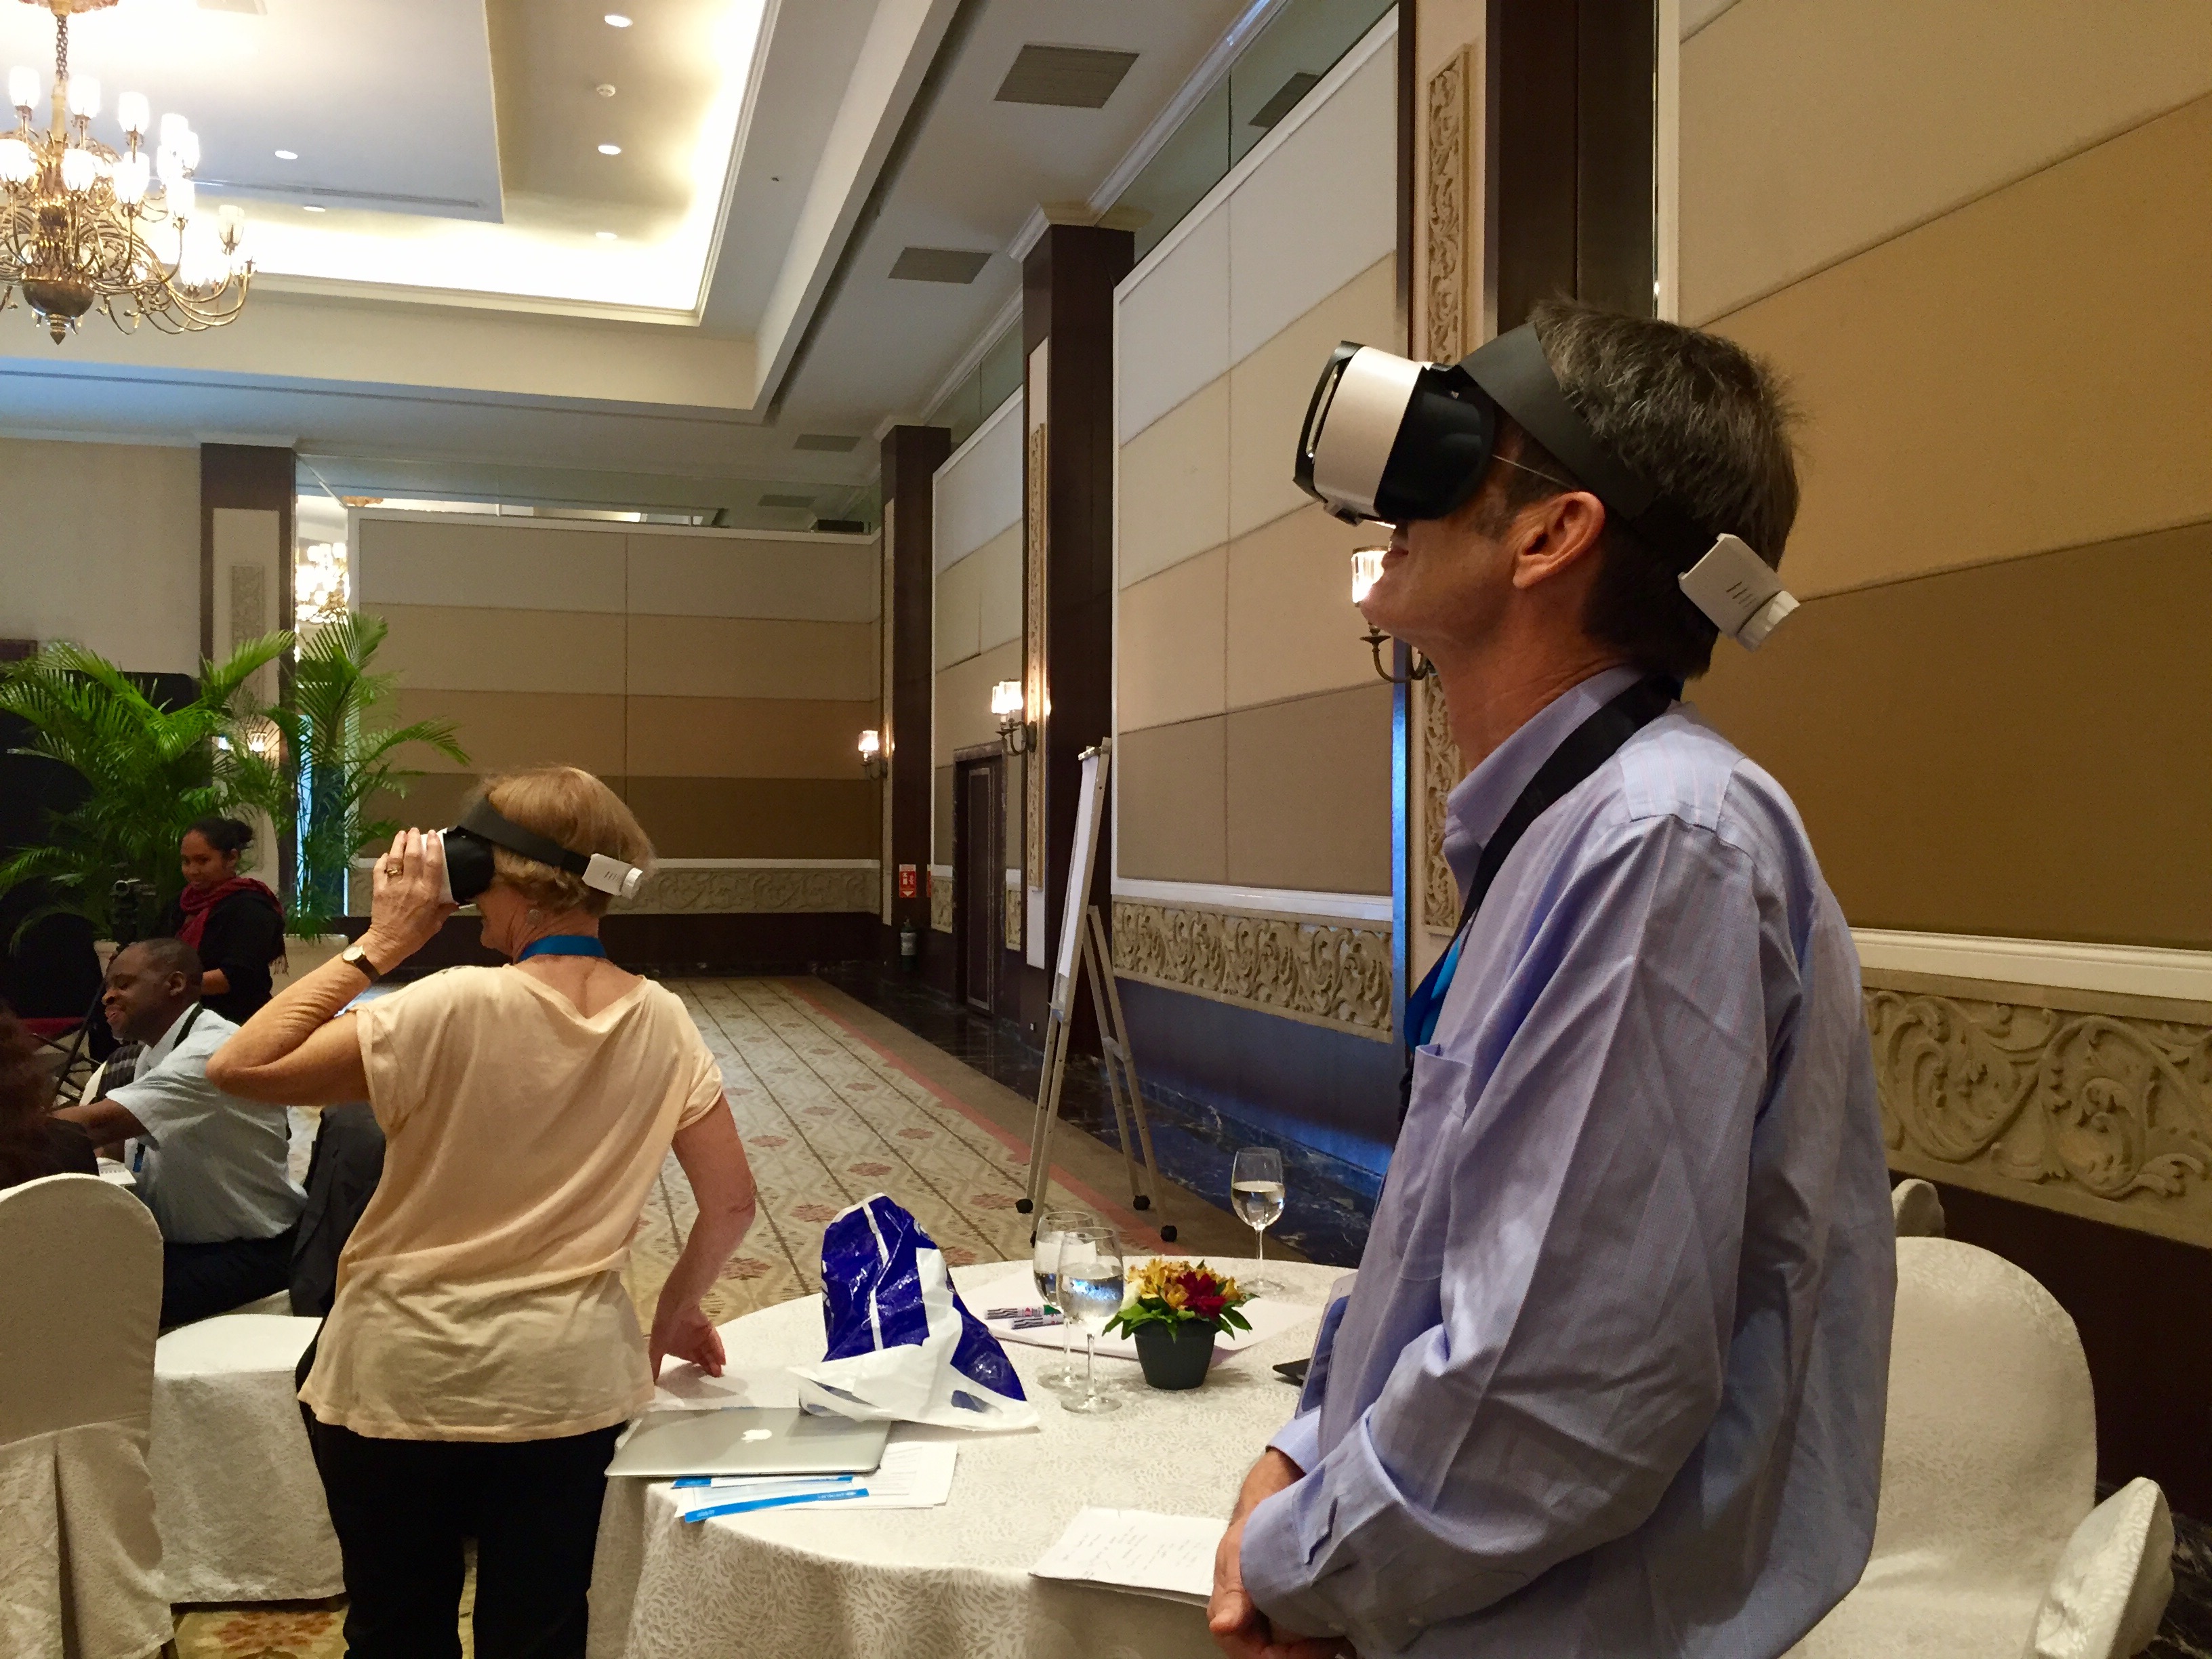 At the parenting support intervention workshop, participants try UNICEF China’s virtual reality devices which show the barefoot social worker and ECD center pilots